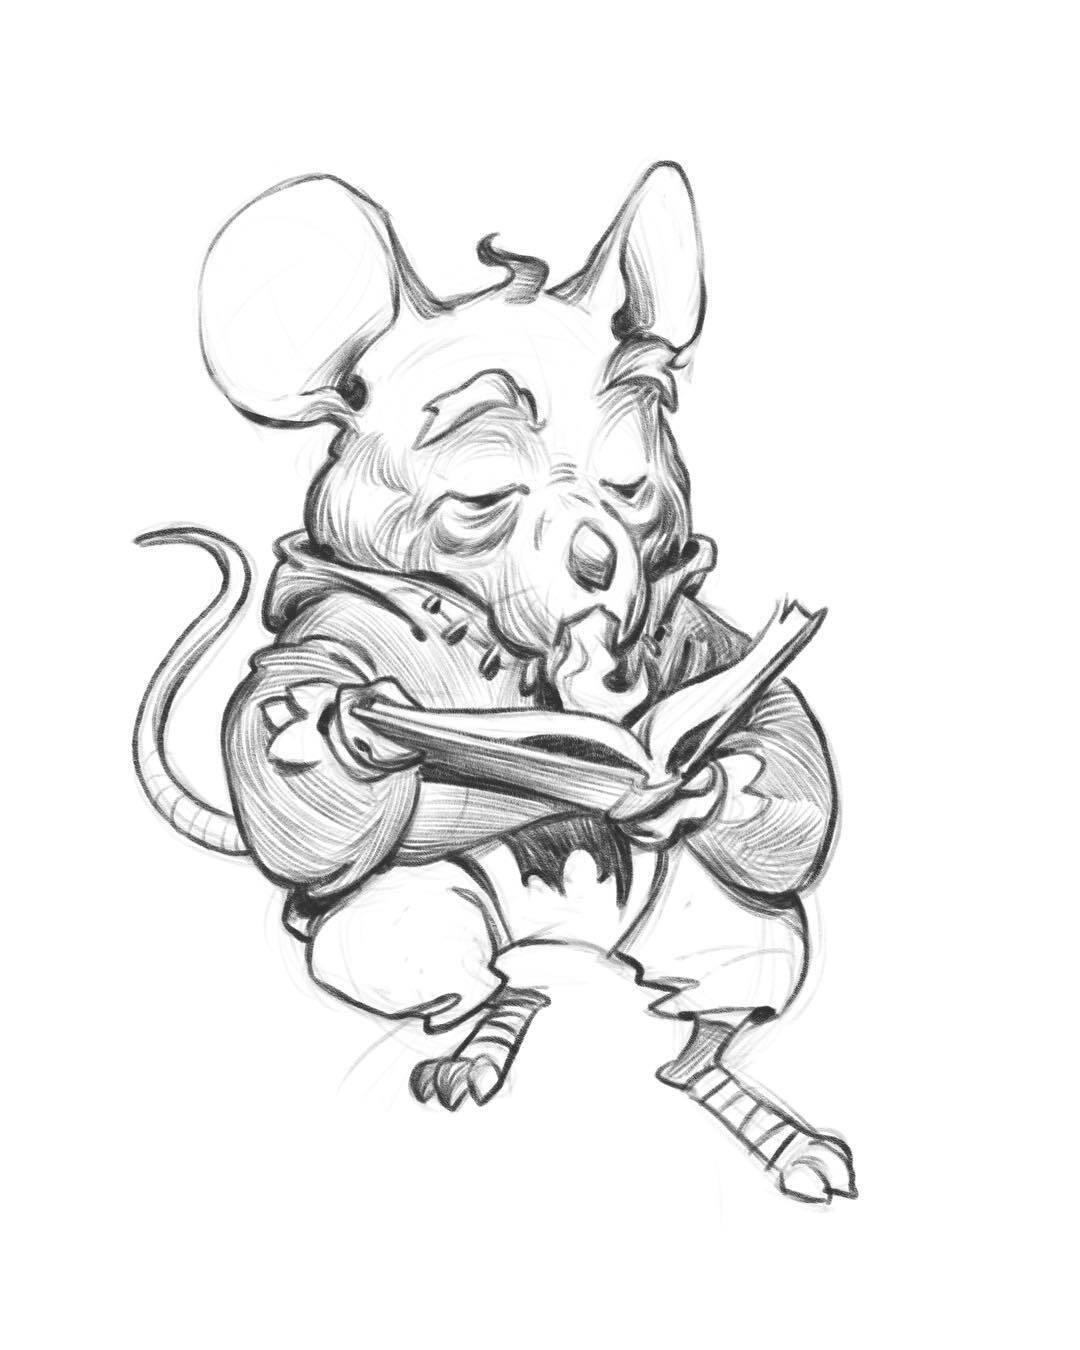 The Mice of Mary-le-Roi -- upcoming book by K.J. Pugh with art by Andrew Bosley